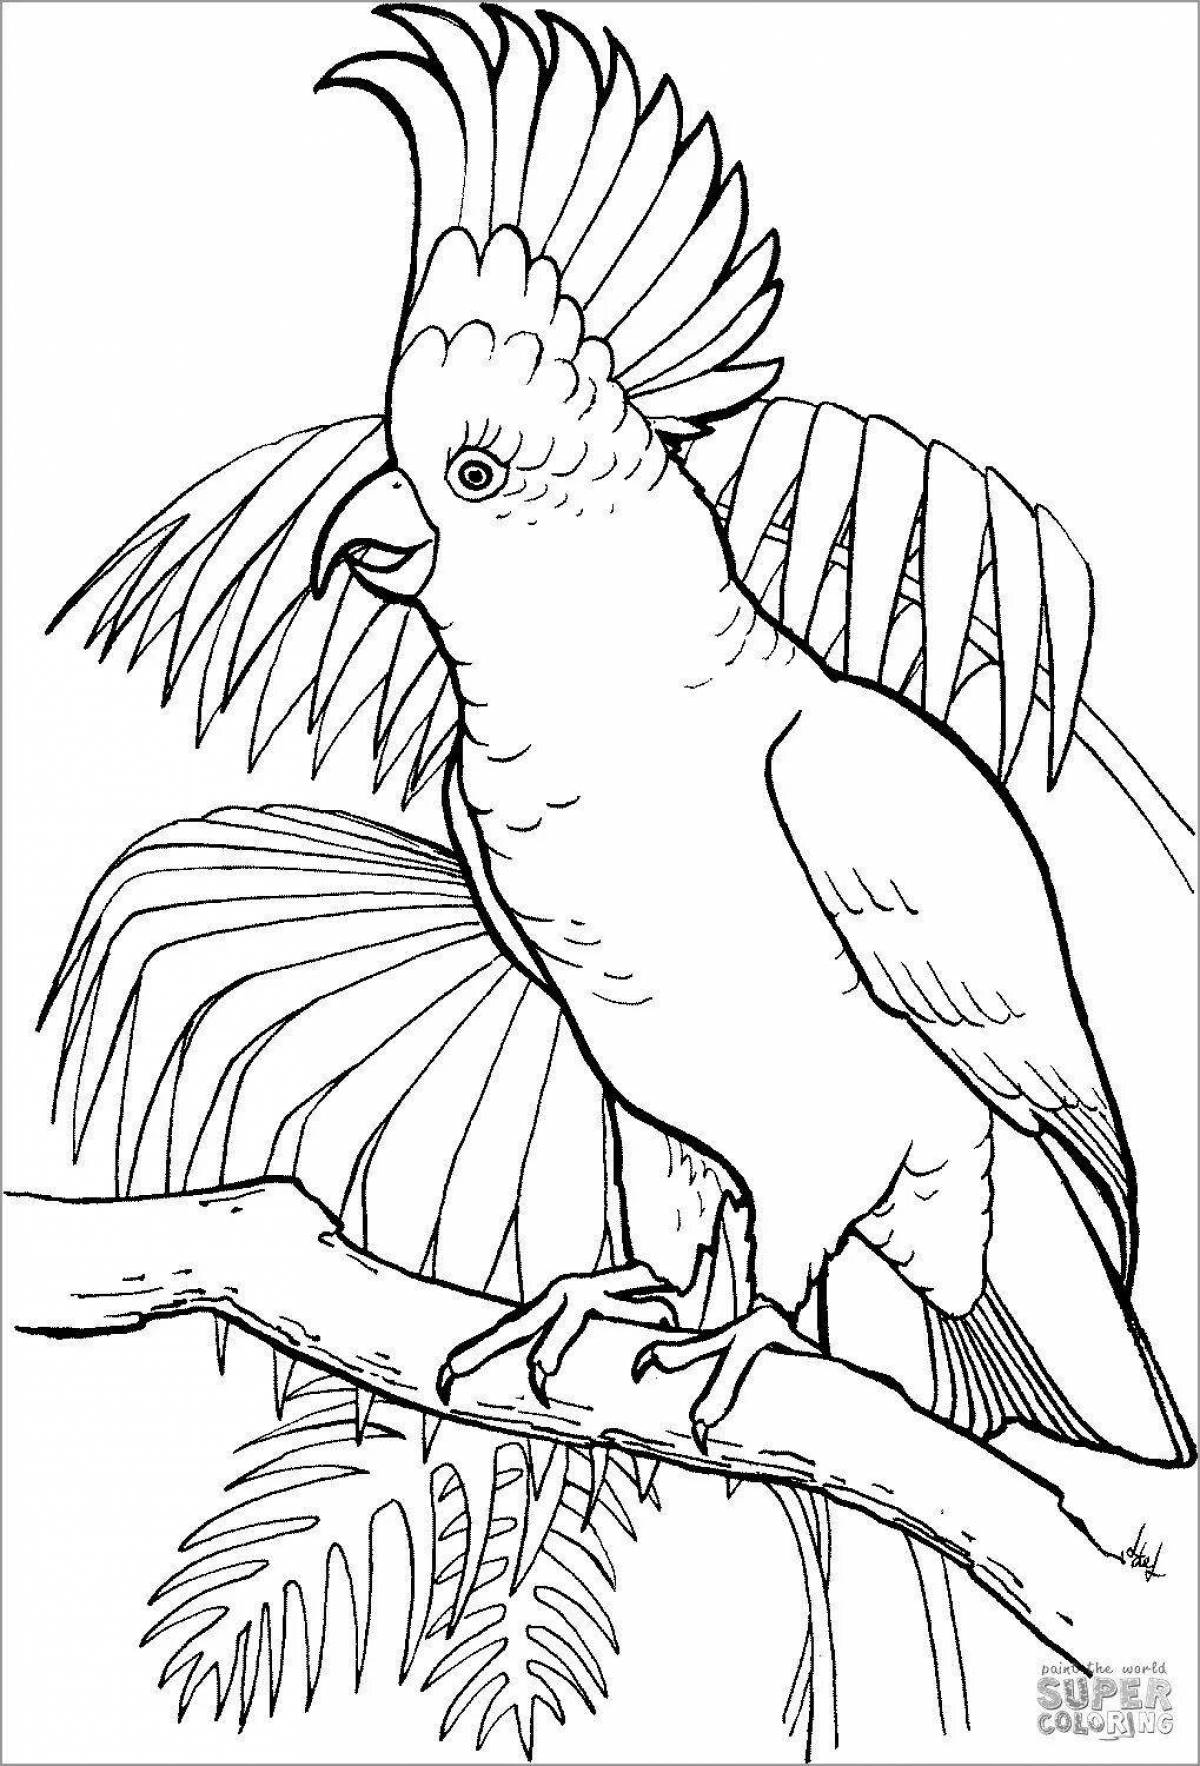 Fine animal and bird coloring pages